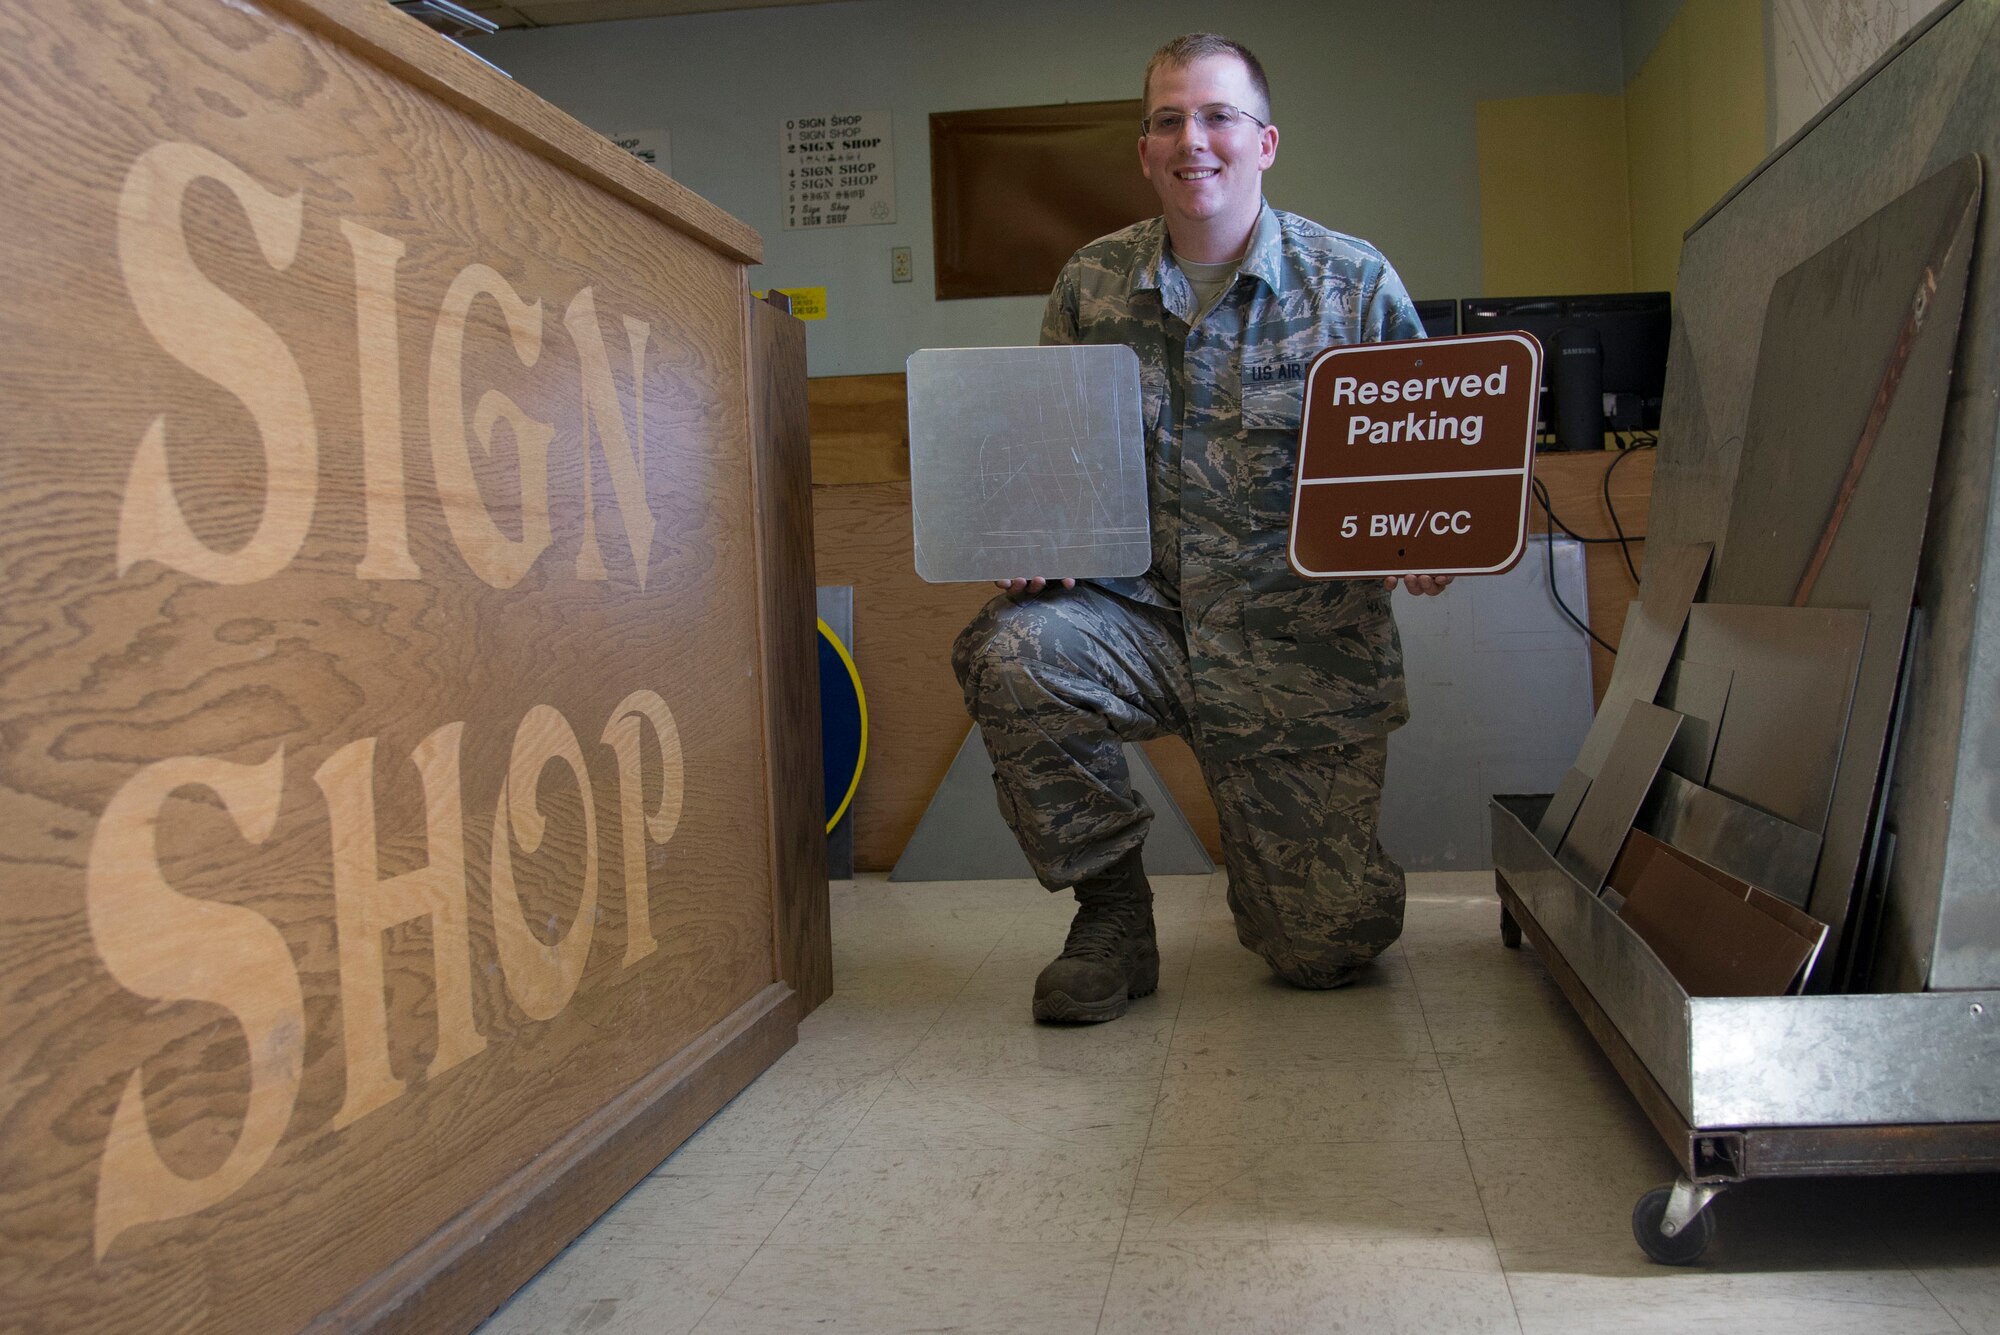 Staff Sgt. Horace Hand, 5th Civil Engineer Squadron structural craftsman, presents a completed sign at Minot Air Force Base, N.D., April 27, 2017. The sign shop maintains all government signs on base and within the missle complex. (U.S. Air Force photo/Airman 1st Class Dillon Audit)